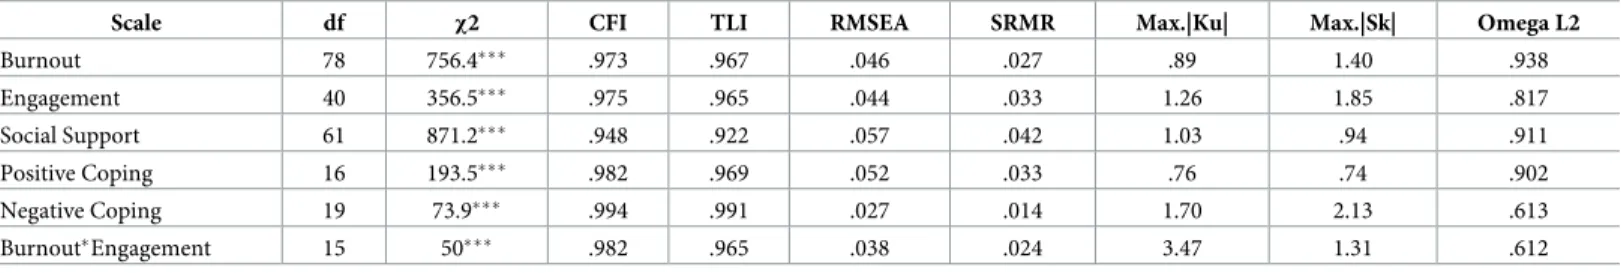 Table 2. Global measurement models’ fit (scaled indices), absolute maximum skewness and kurtosis for items in each construct and Omega L2 reliability.